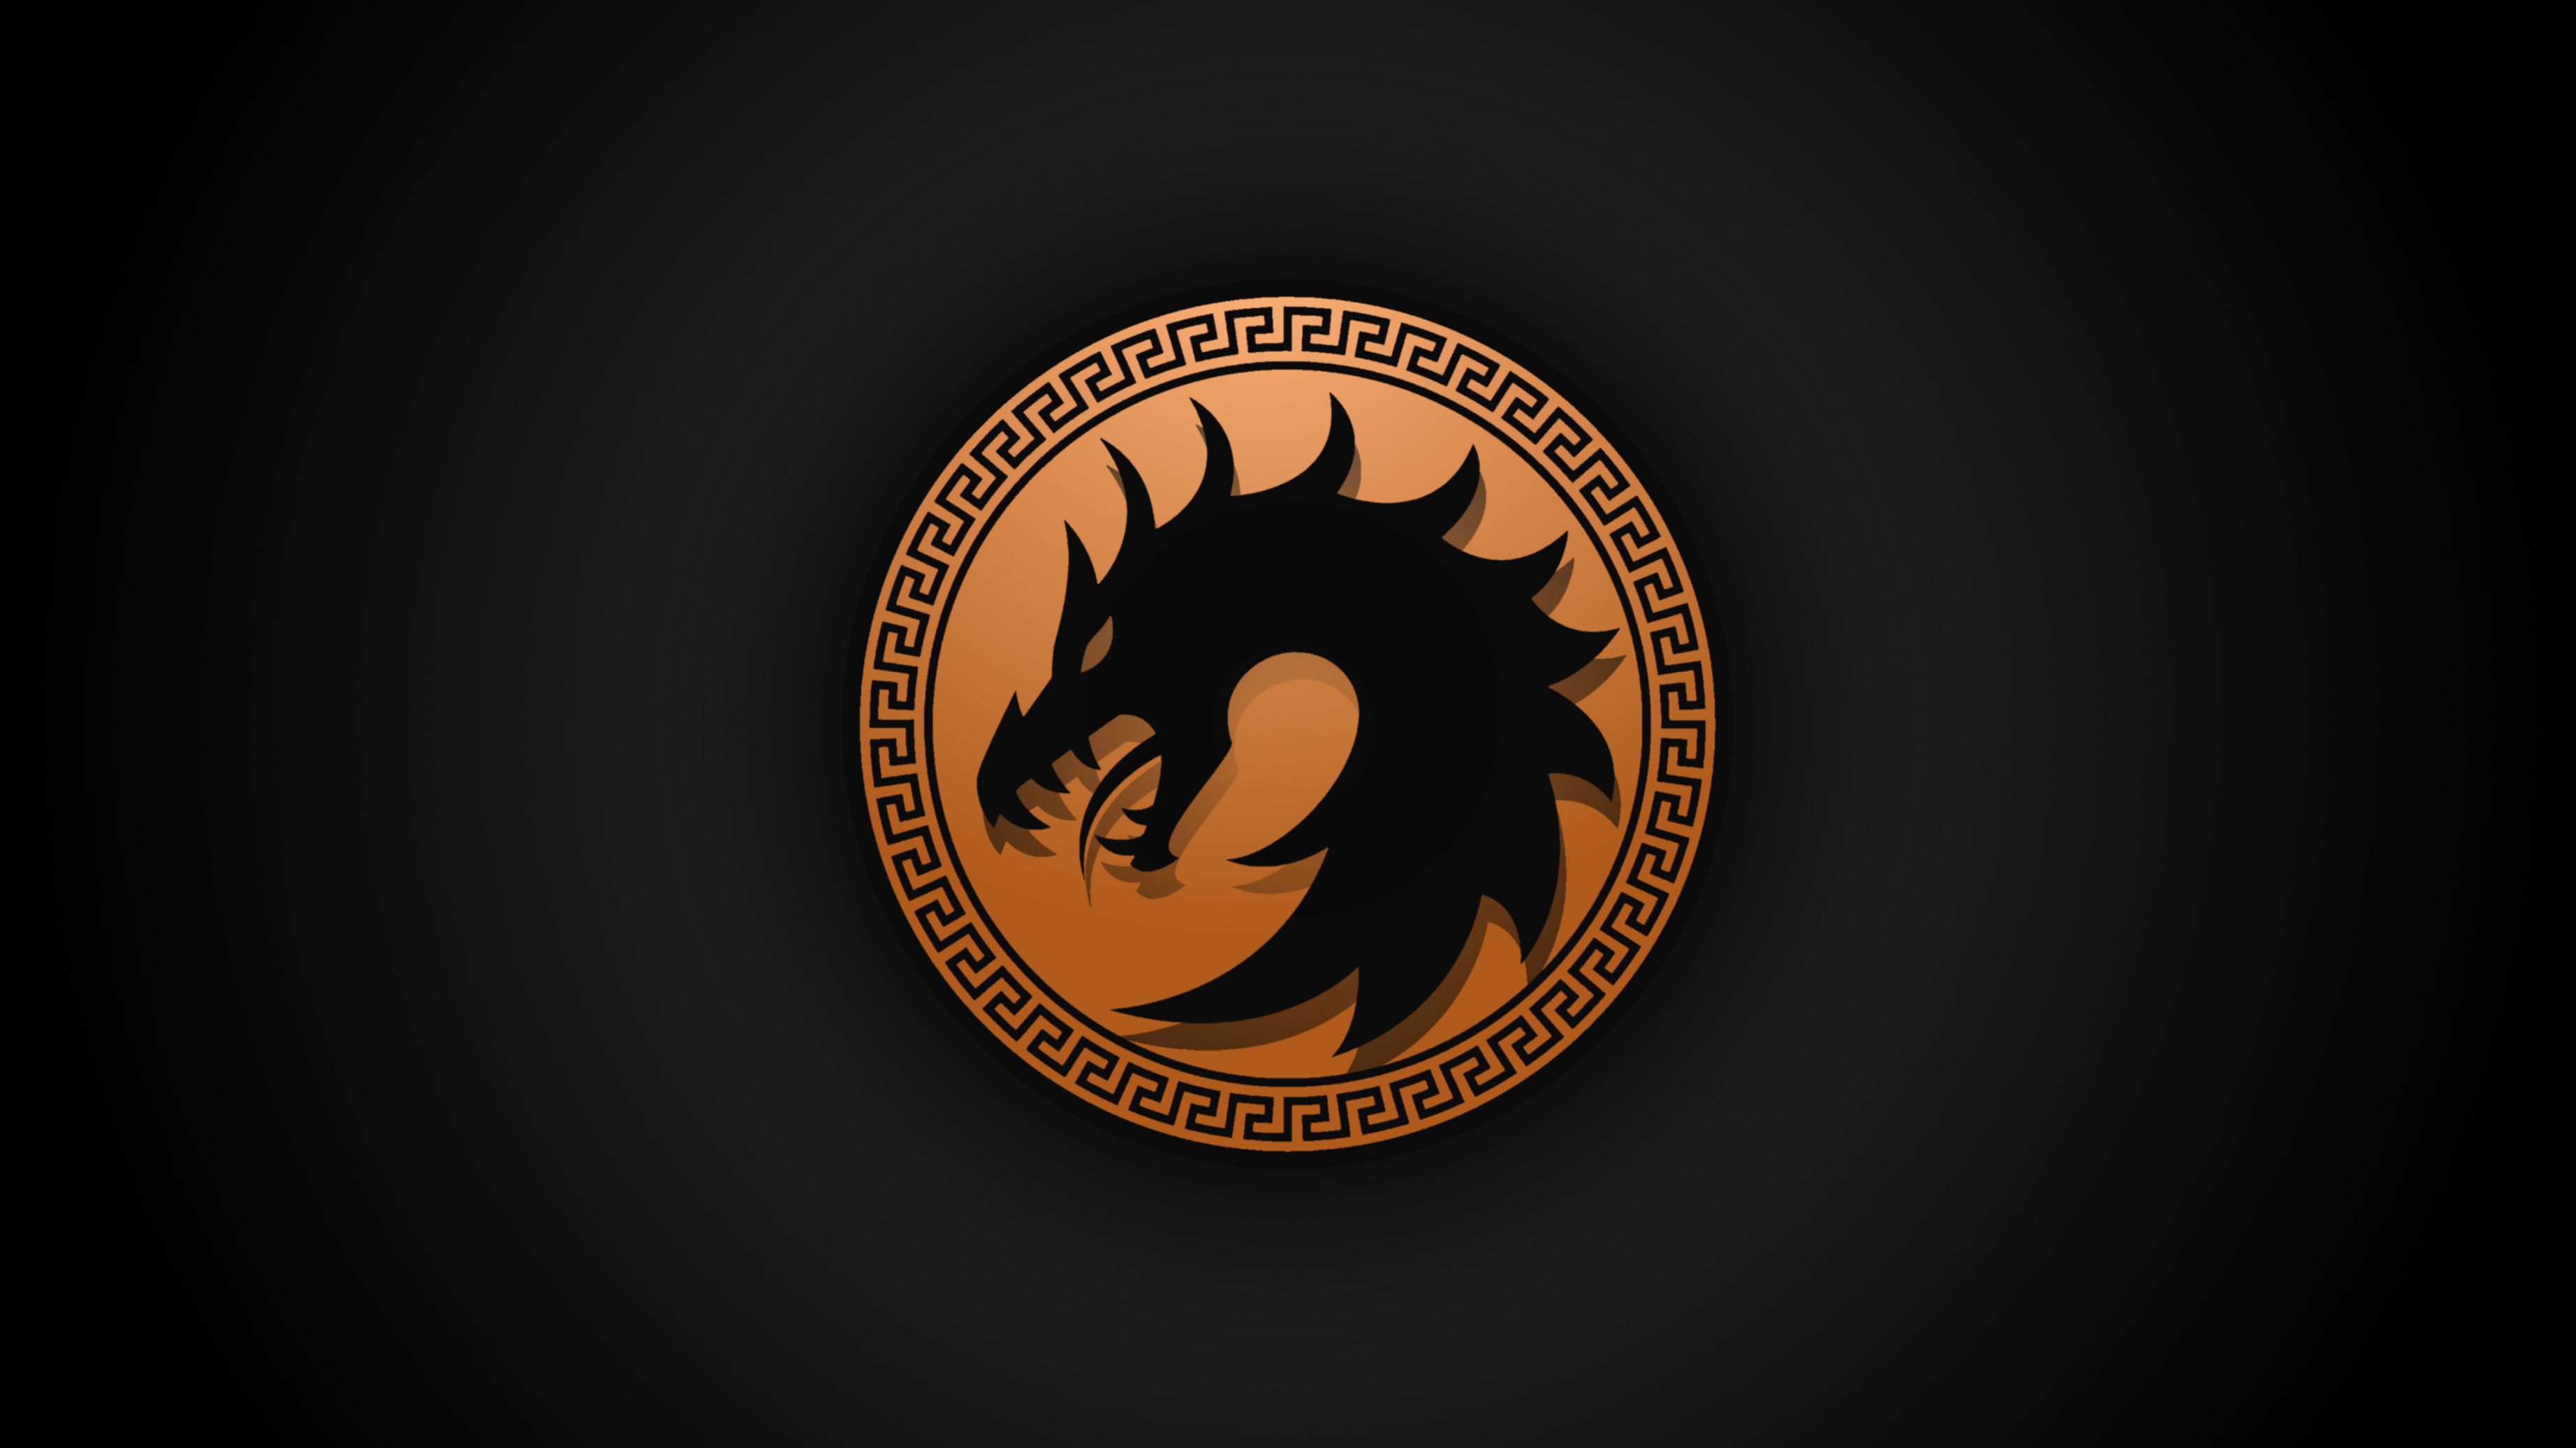 So I made a wallpaper from the Ender's Game Dragon Army logo. How ...